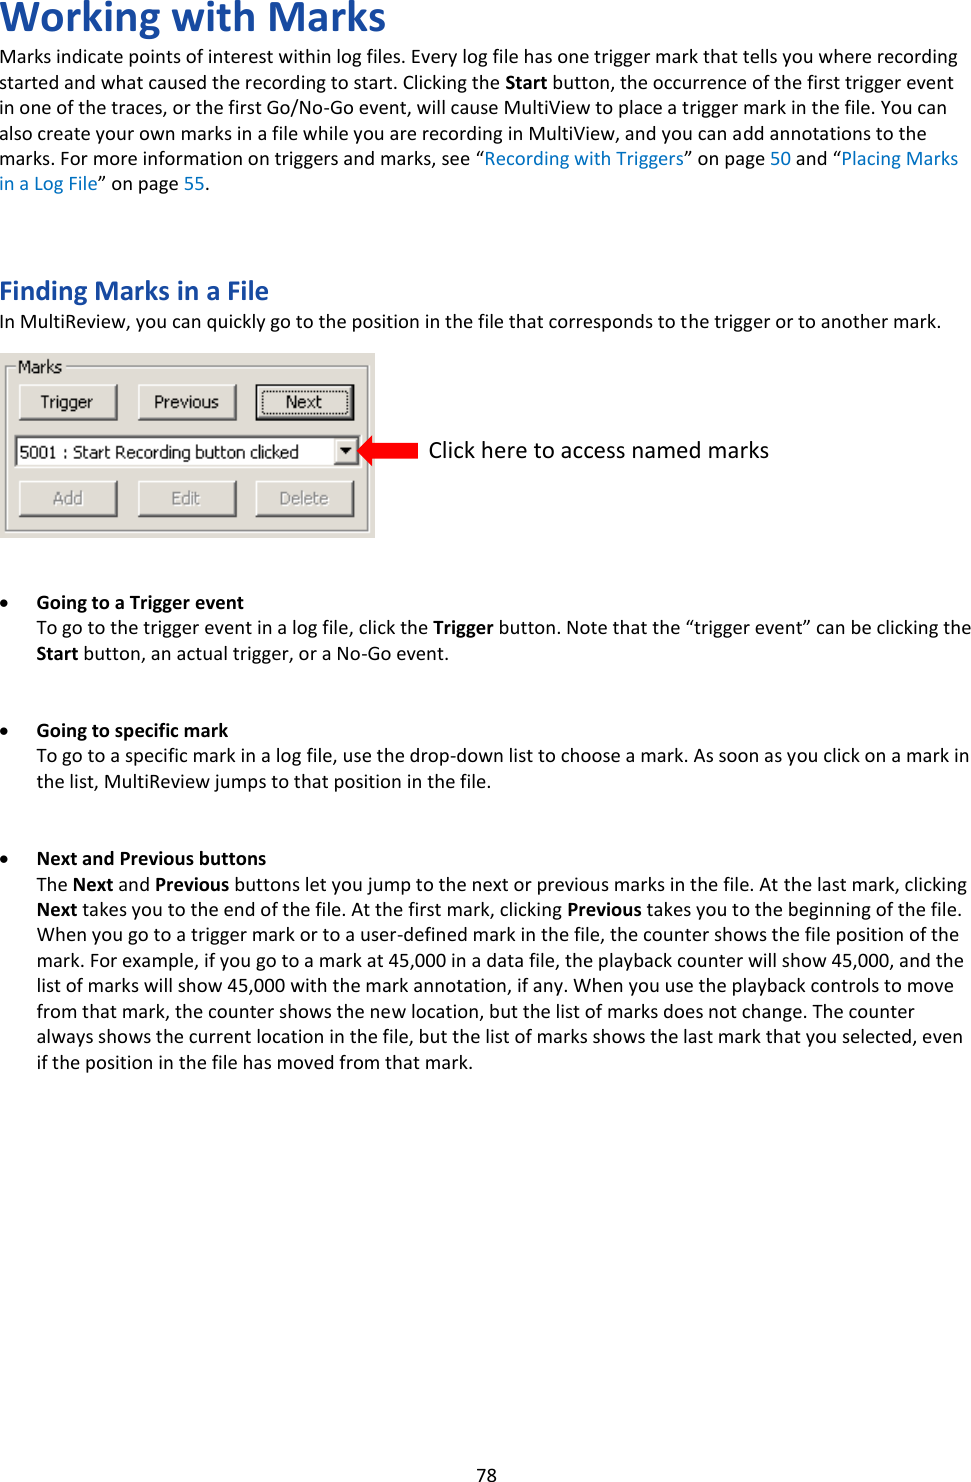   78 Working with Marks Marks indicate points of interest within log files. Every log file has one trigger mark that tells you where recording started and what caused the recording to start. Clicking the Start button, the occurrence of the first trigger event in one of the traces, or the first Go/No-Go event, will cause MultiView to place a trigger mark in the file. You can also create your own marks in a file while you are recording in MultiView, and you can add annotations to the marks. For more information on triggers and marks, see “Recording with Triggers” on page 50 and “Placing Marks in a Log File” on page 55.    Finding Marks in a File In MultiReview, you can quickly go to the position in the file that corresponds to the trigger or to another mark.           • Going to a Trigger event To go to the trigger event in a log file, click the Trigger button. Note that the “trigger event” can be clicking the Start button, an actual trigger, or a No-Go event.   • Going to specific mark To go to a specific mark in a log file, use the drop-down list to choose a mark. As soon as you click on a mark in the list, MultiReview jumps to that position in the file.   • Next and Previous buttons The Next and Previous buttons let you jump to the next or previous marks in the file. At the last mark, clicking Next takes you to the end of the file. At the first mark, clicking Previous takes you to the beginning of the file. When you go to a trigger mark or to a user-defined mark in the file, the counter shows the file position of the mark. For example, if you go to a mark at 45,000 in a data file, the playback counter will show 45,000, and the list of marks will show 45,000 with the mark annotation, if any. When you use the playback controls to move from that mark, the counter shows the new location, but the list of marks does not change. The counter always shows the current location in the file, but the list of marks shows the last mark that you selected, even if the position in the file has moved from that mark.               Click here to access named marks 